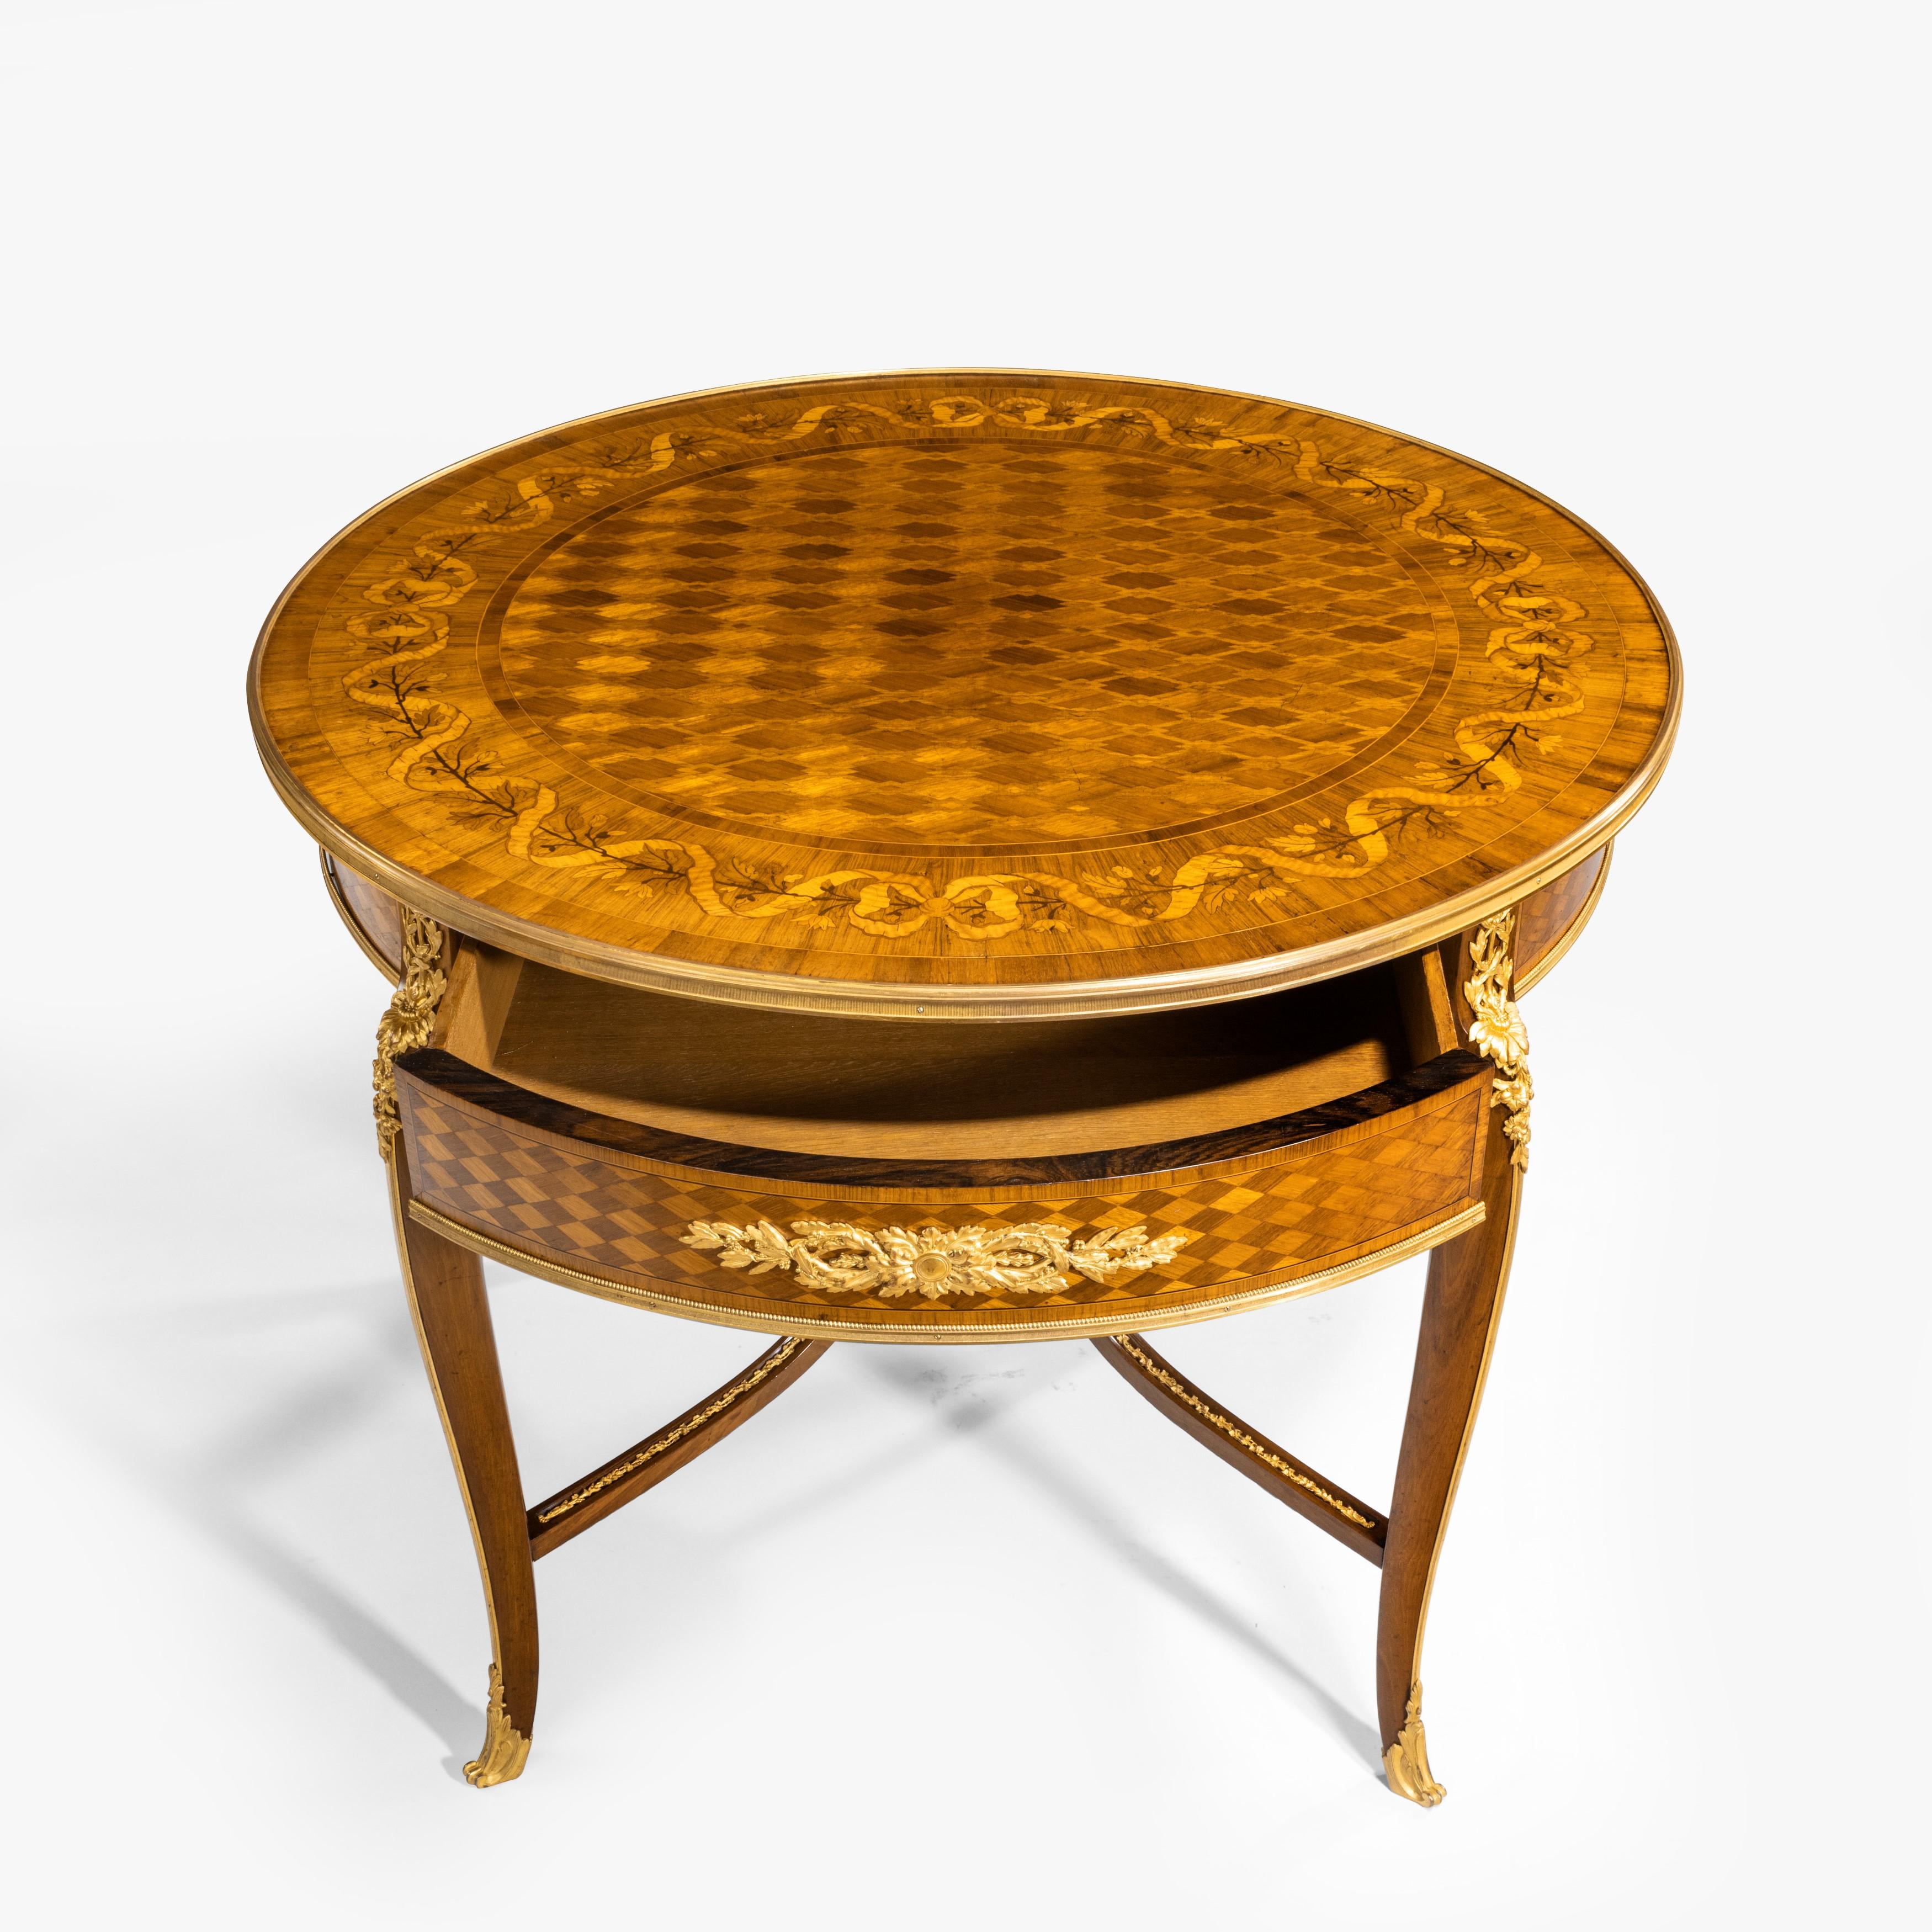 19th Century Parquetry Centre Table in the Louis XVI Manner by François Linke For Sale 5